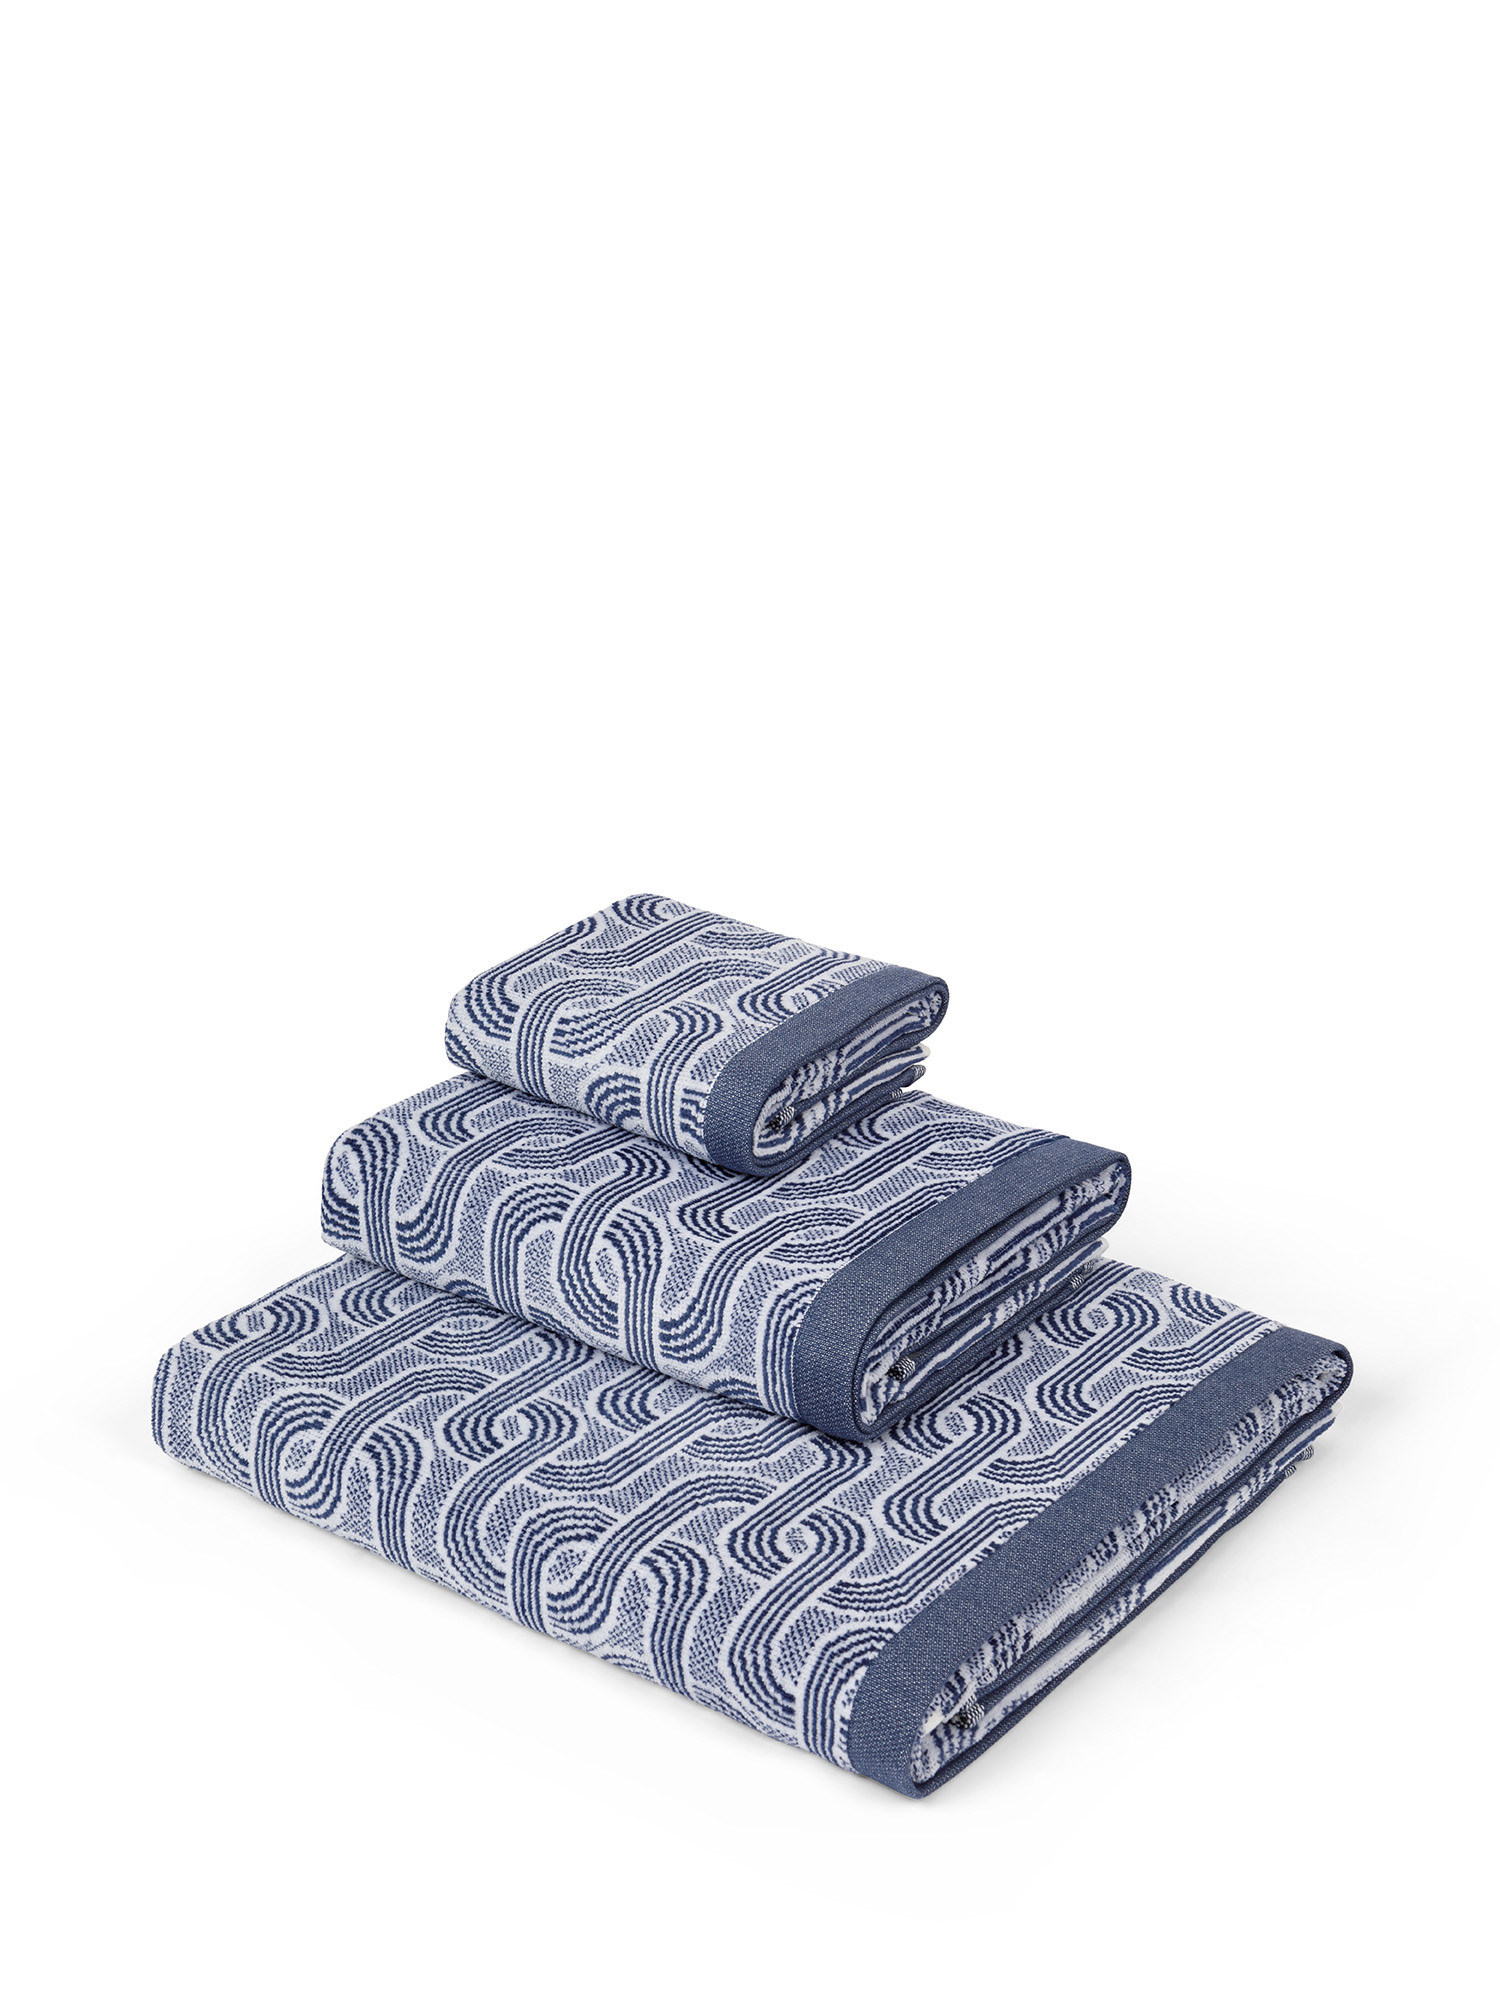 Velor cotton towel with chain motif, Blue, large image number 0